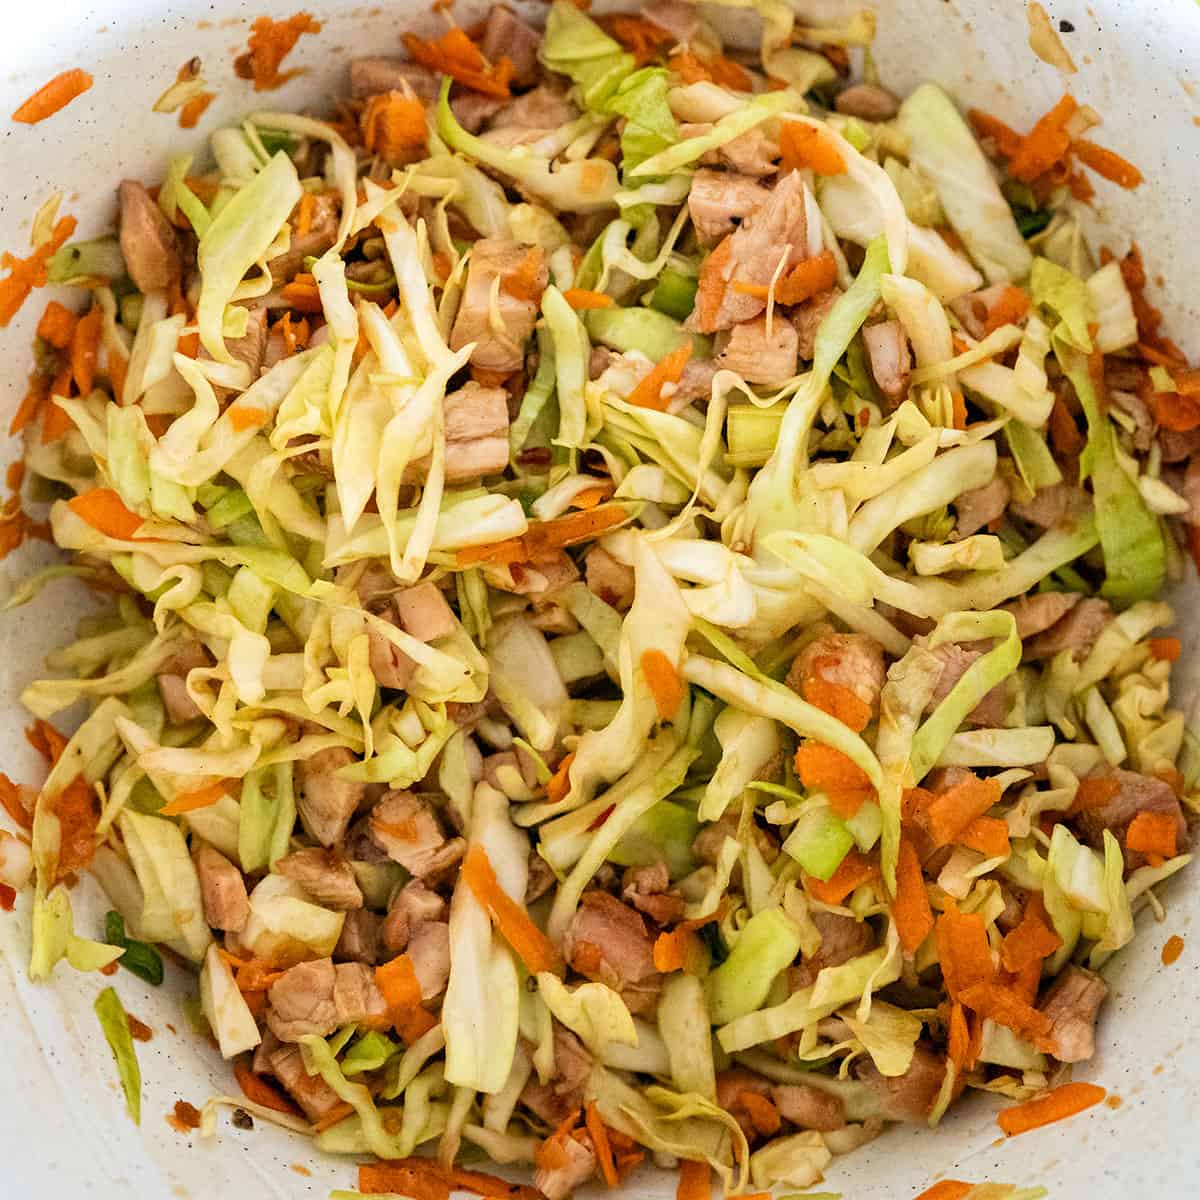 Shredded cabbage, carrots and green onions mixed with chopped chicken.